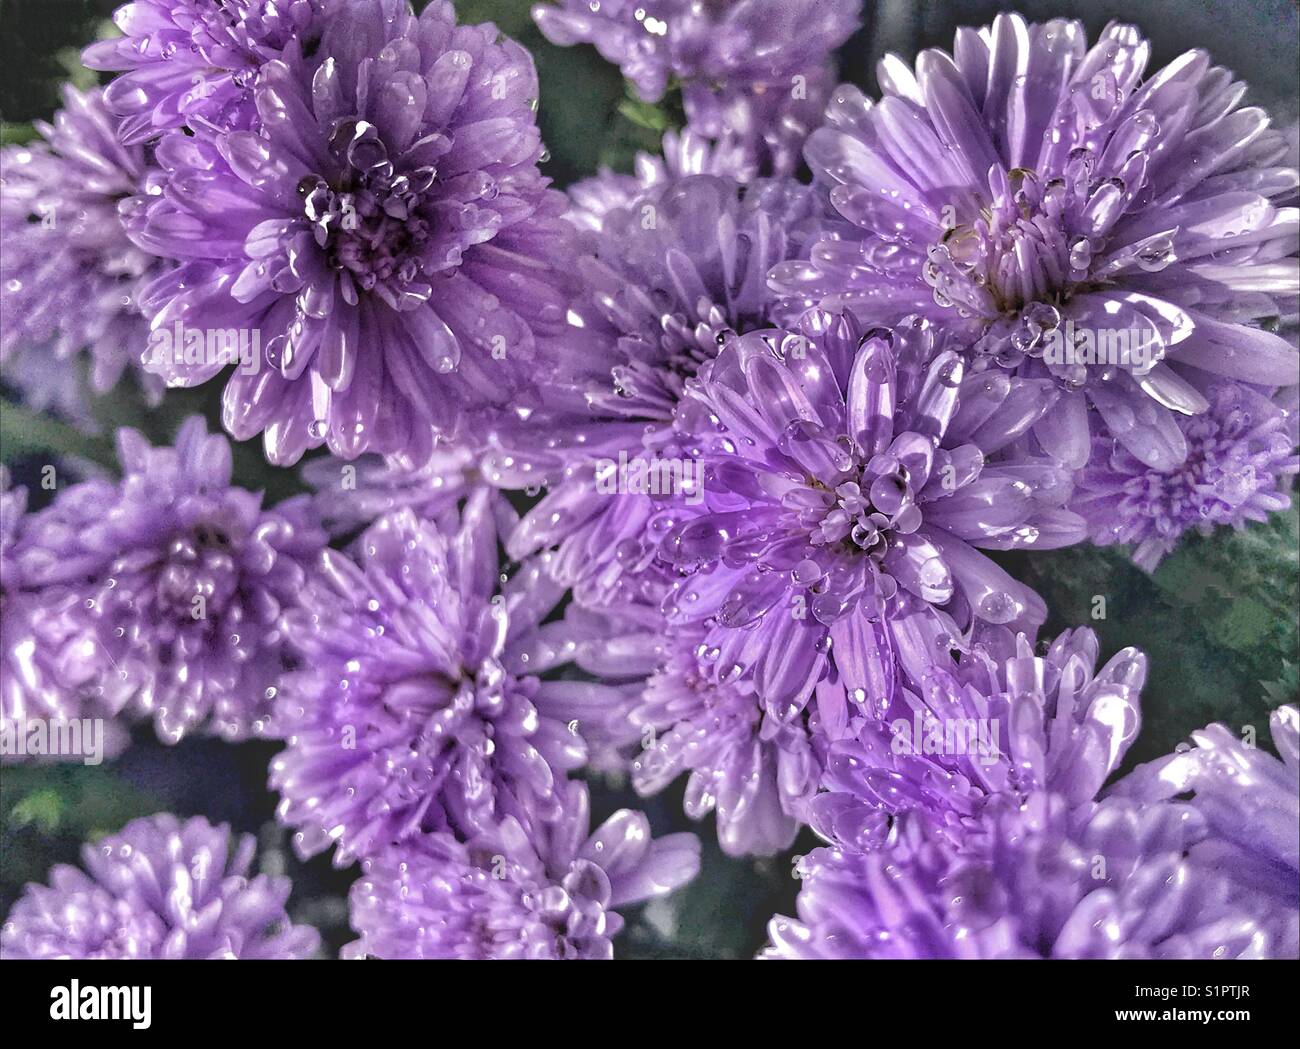 Purple Henry aster flowers covered with water droplets with abstract effects, Symphyotrichum novi-belgii Stock Photo